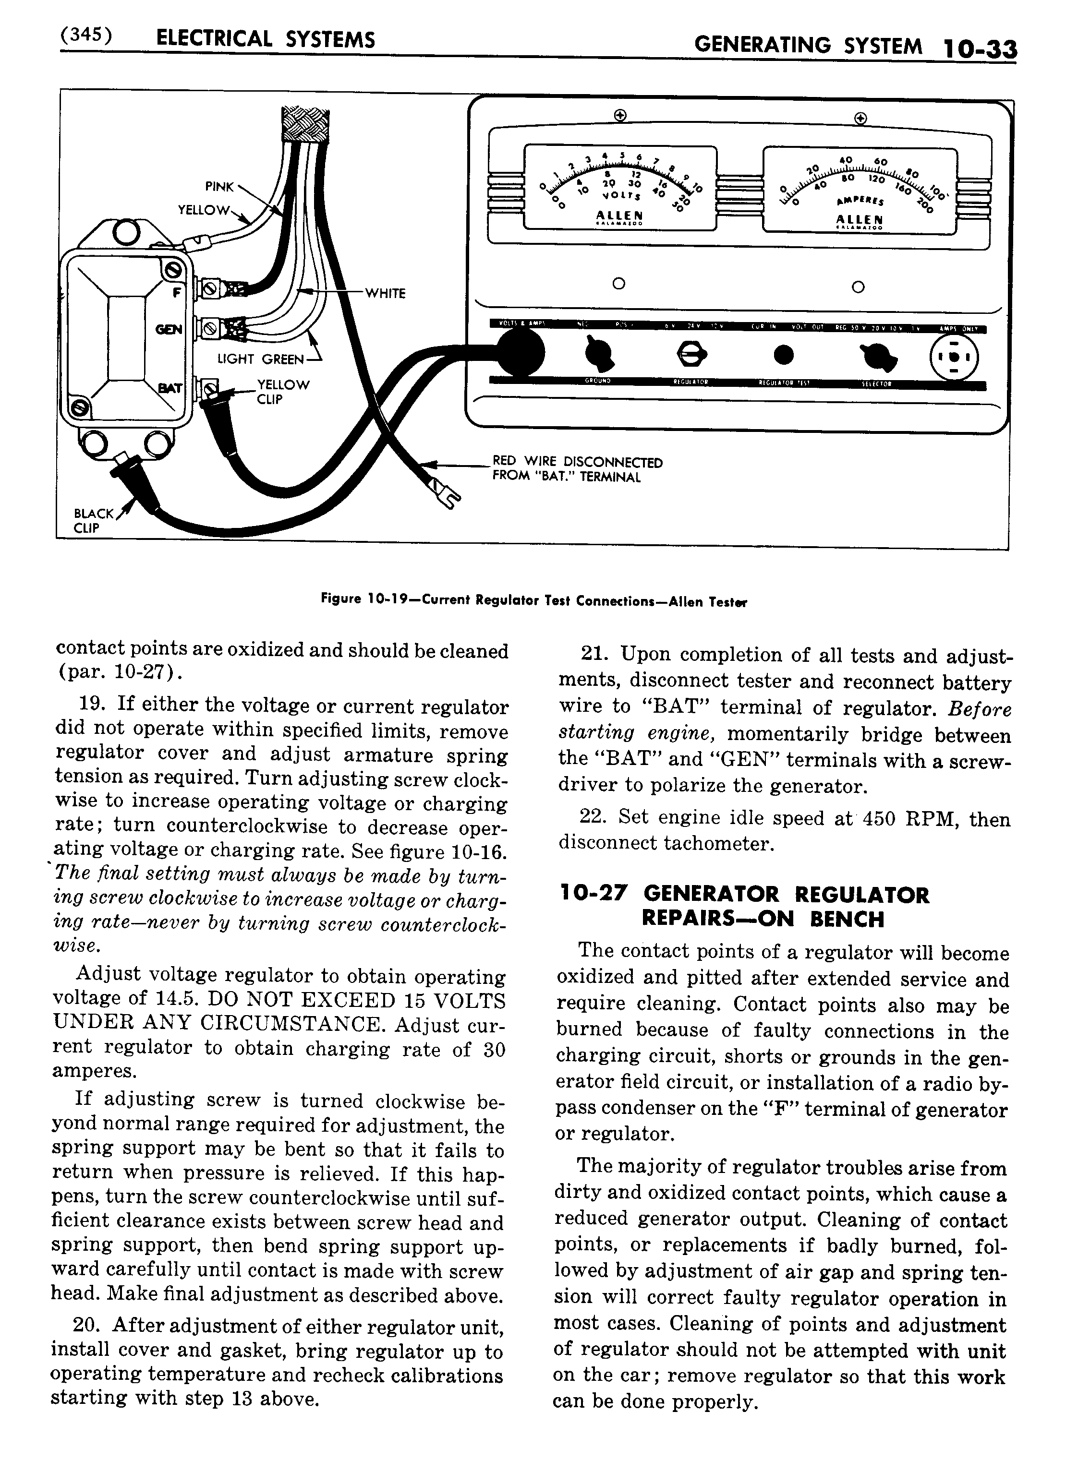 n_11 1954 Buick Shop Manual - Electrical Systems-033-033.jpg